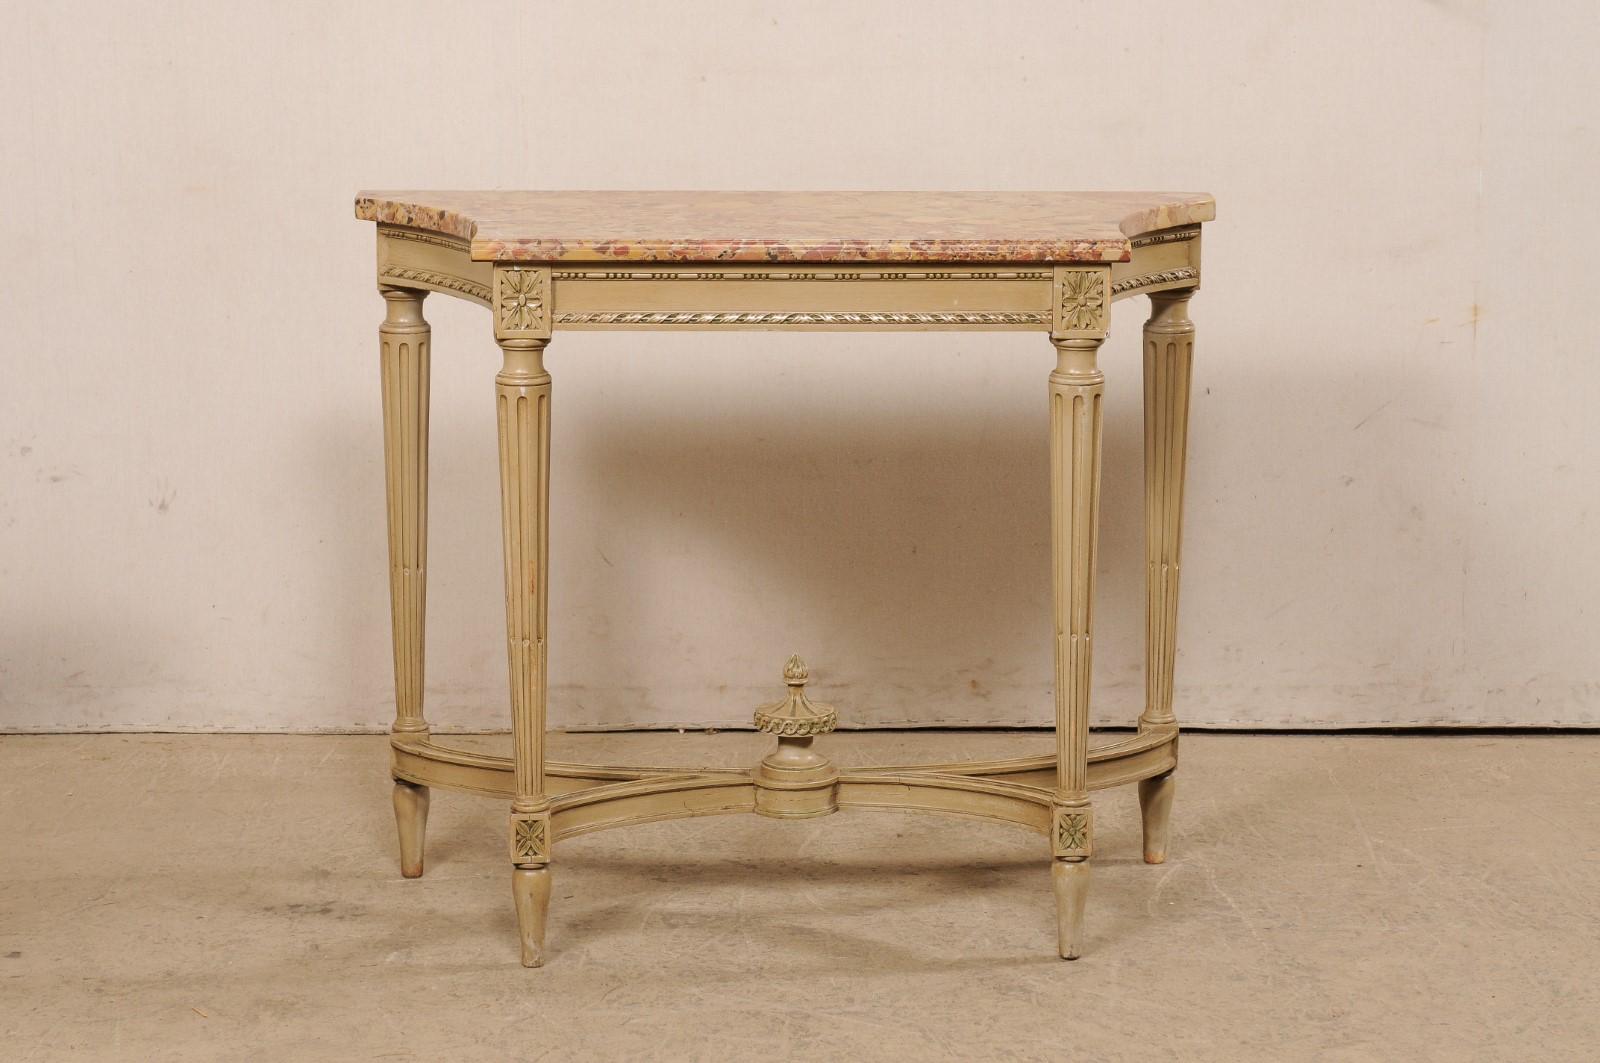 A French console table, with fabulous breche d'alep marble top, circa 1930s-1940s. This antique table from France features a breche d'alep marble top, comprised of a straight and shorter front side, with nicely scalloped & concaved sides, and longer